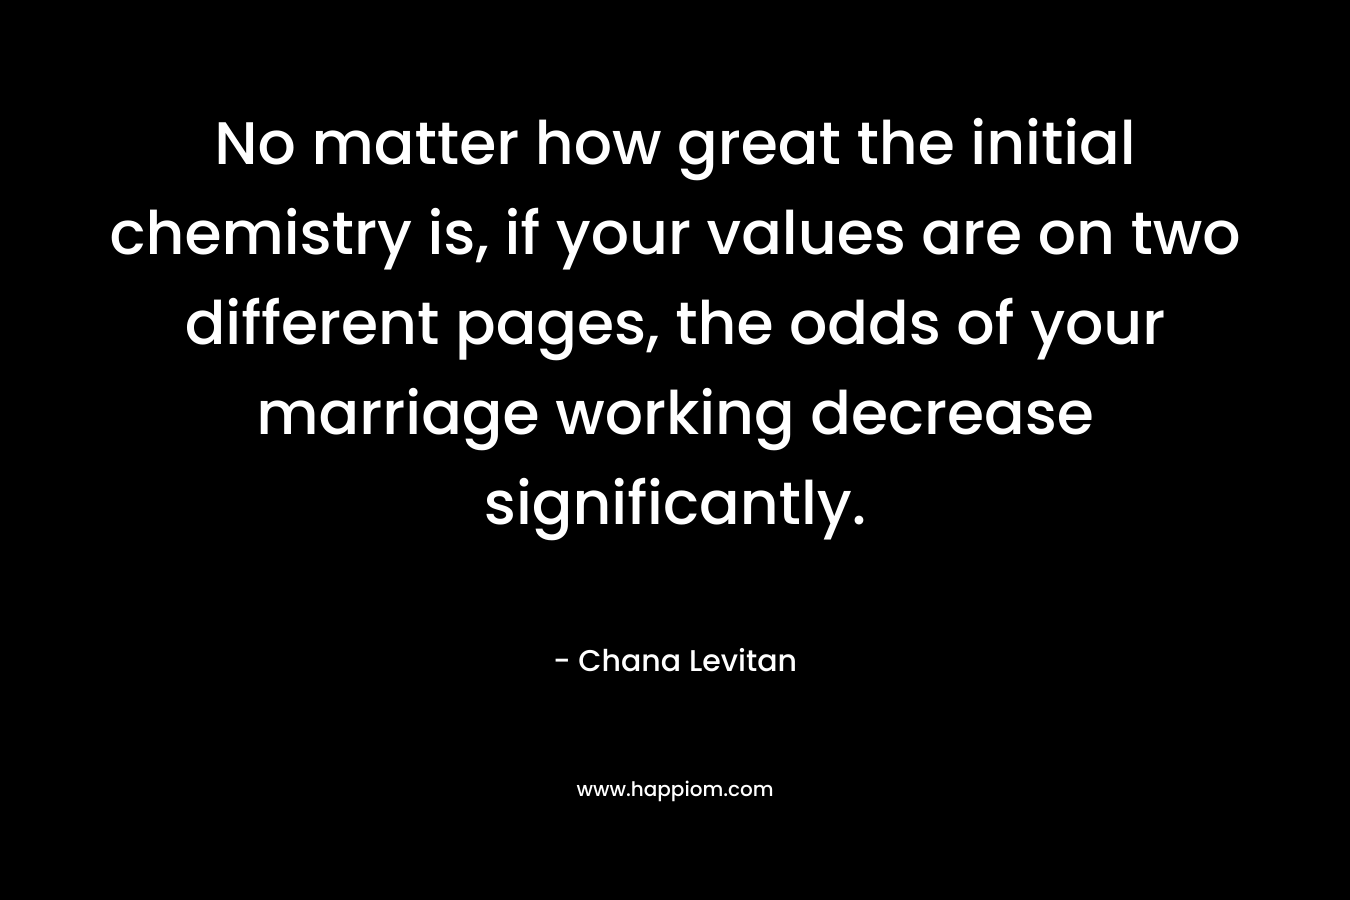 No matter how great the initial chemistry is, if your values are on two different pages, the odds of your marriage working decrease significantly.